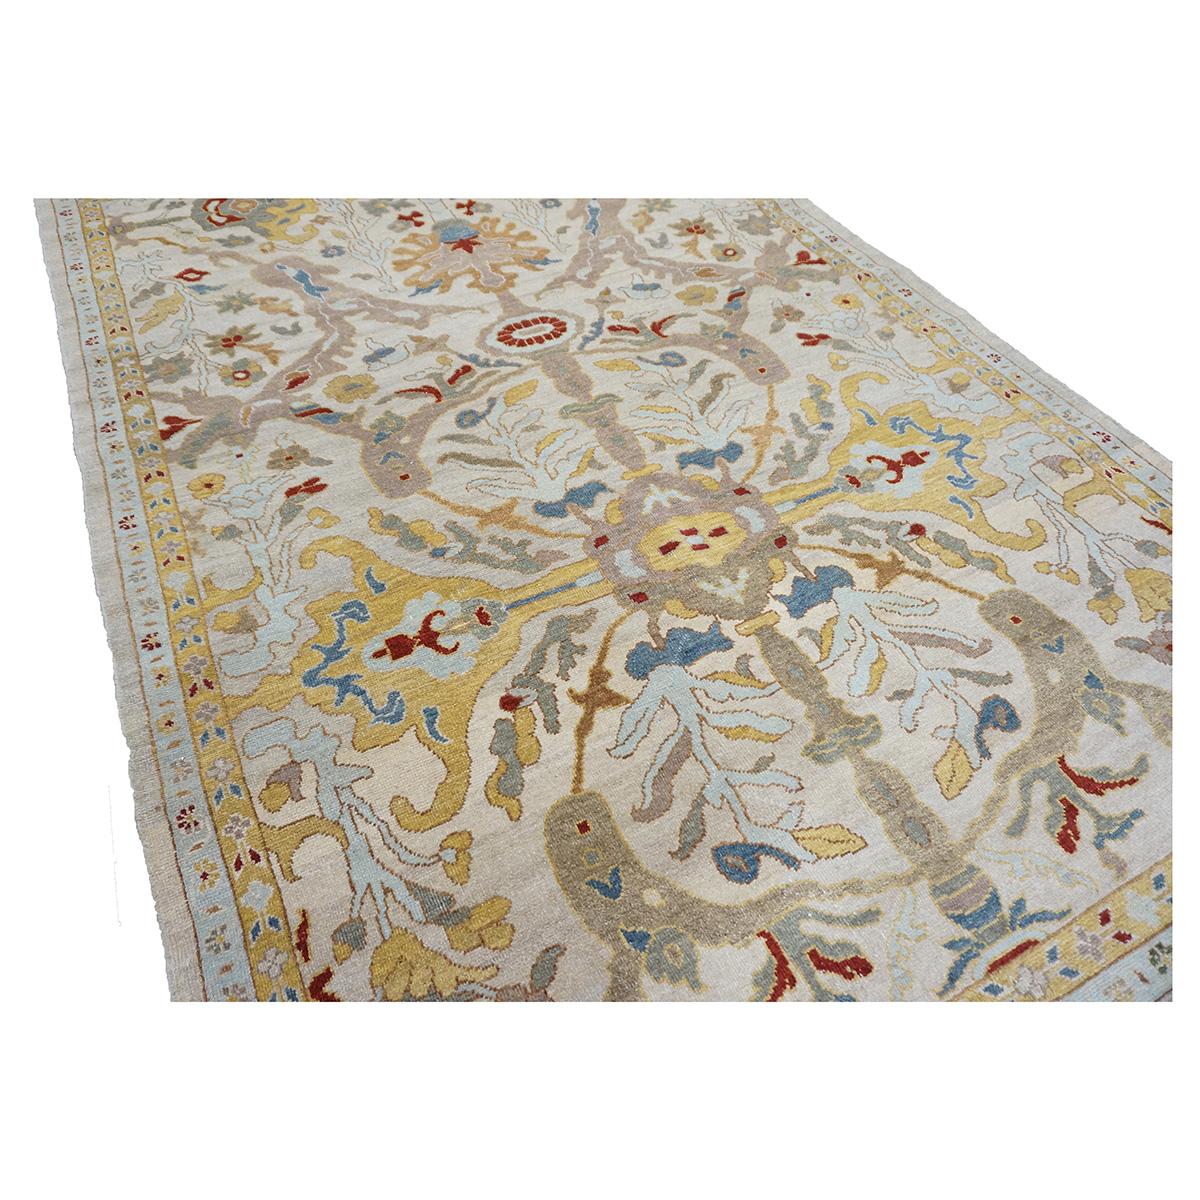 21st Century Sultanabad 6x9 Ivory & Gold Handmade Area Rug In Excellent Condition For Sale In Houston, TX